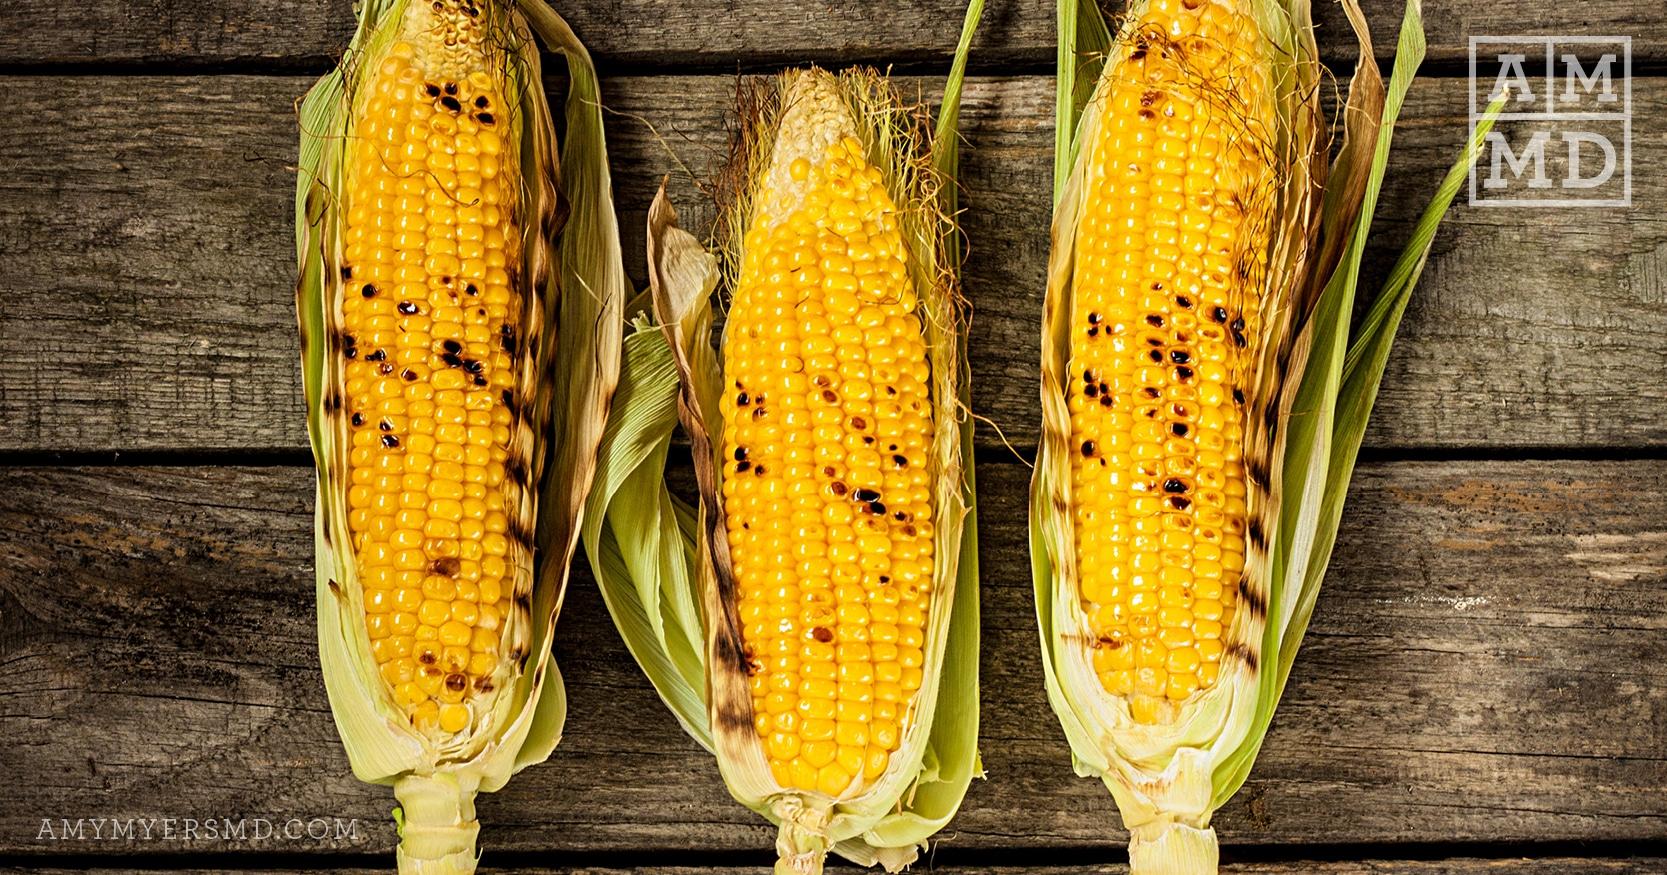 Is Corn The Next Gluten? Does Corn Have Gluten? - Amy Myers MD®